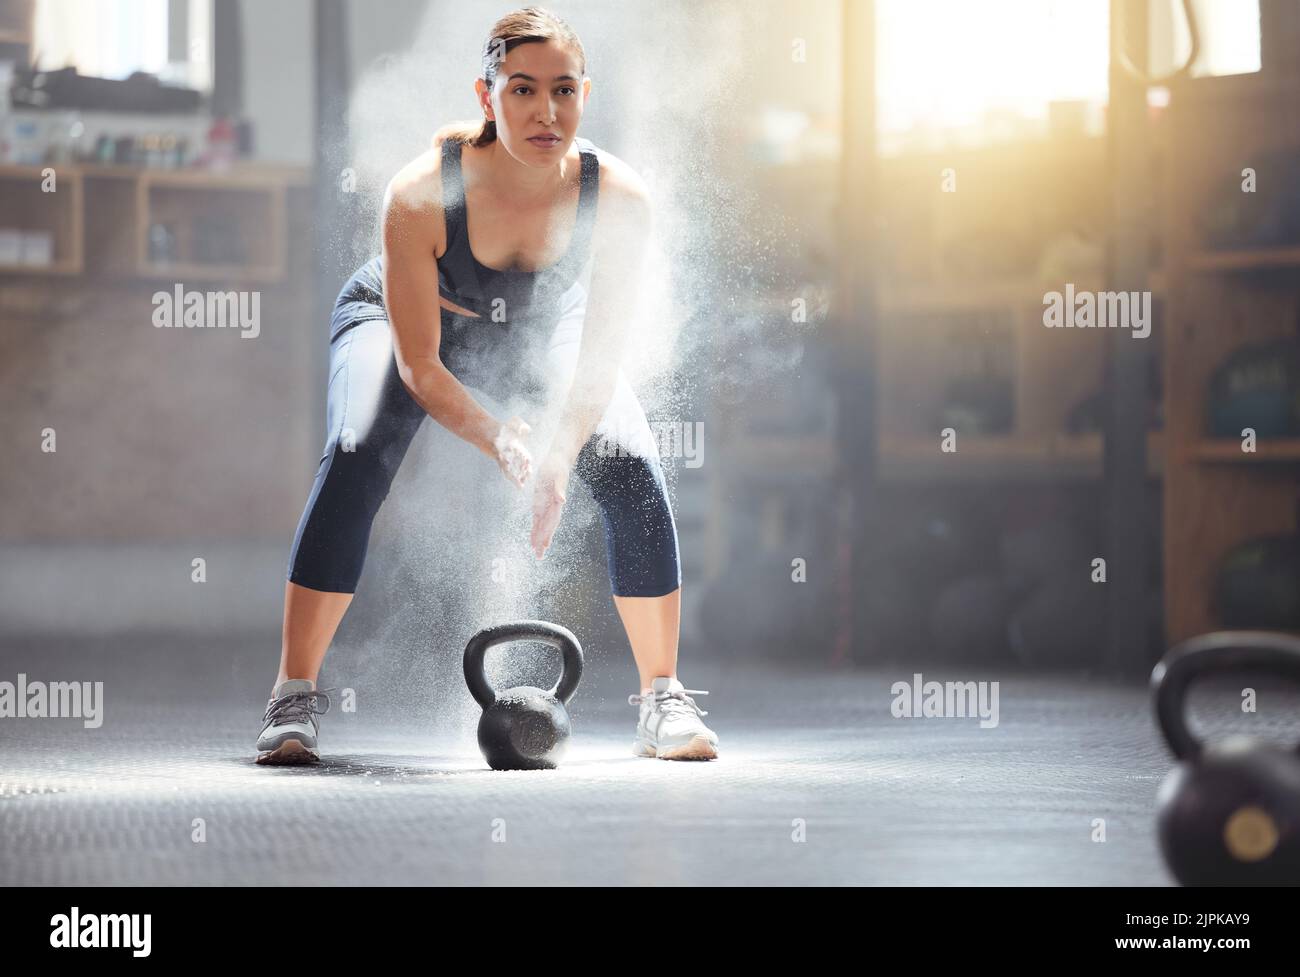 Fitness kettlebell and gym woman with chalk on hands during weightlifting workout, exercise or training. Athletic, active and strong girl exercising Stock Photo